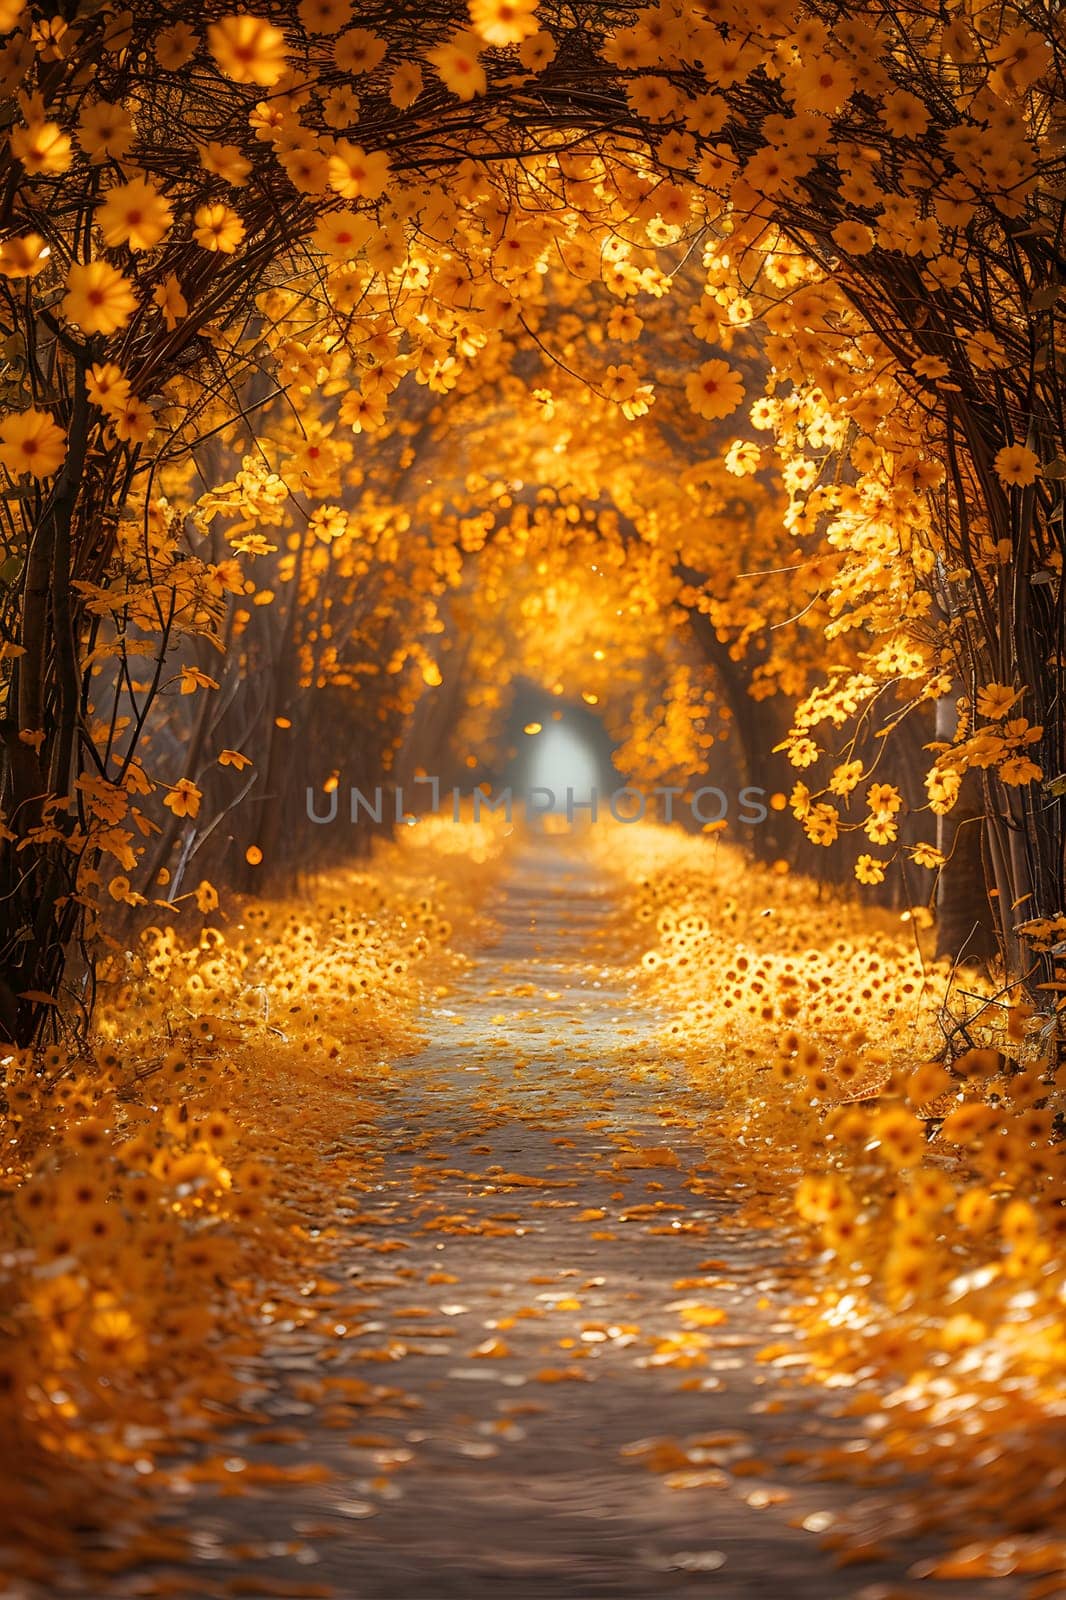 A Brown Wood Road surface surrounded by Amber leaves in autumn by Nadtochiy